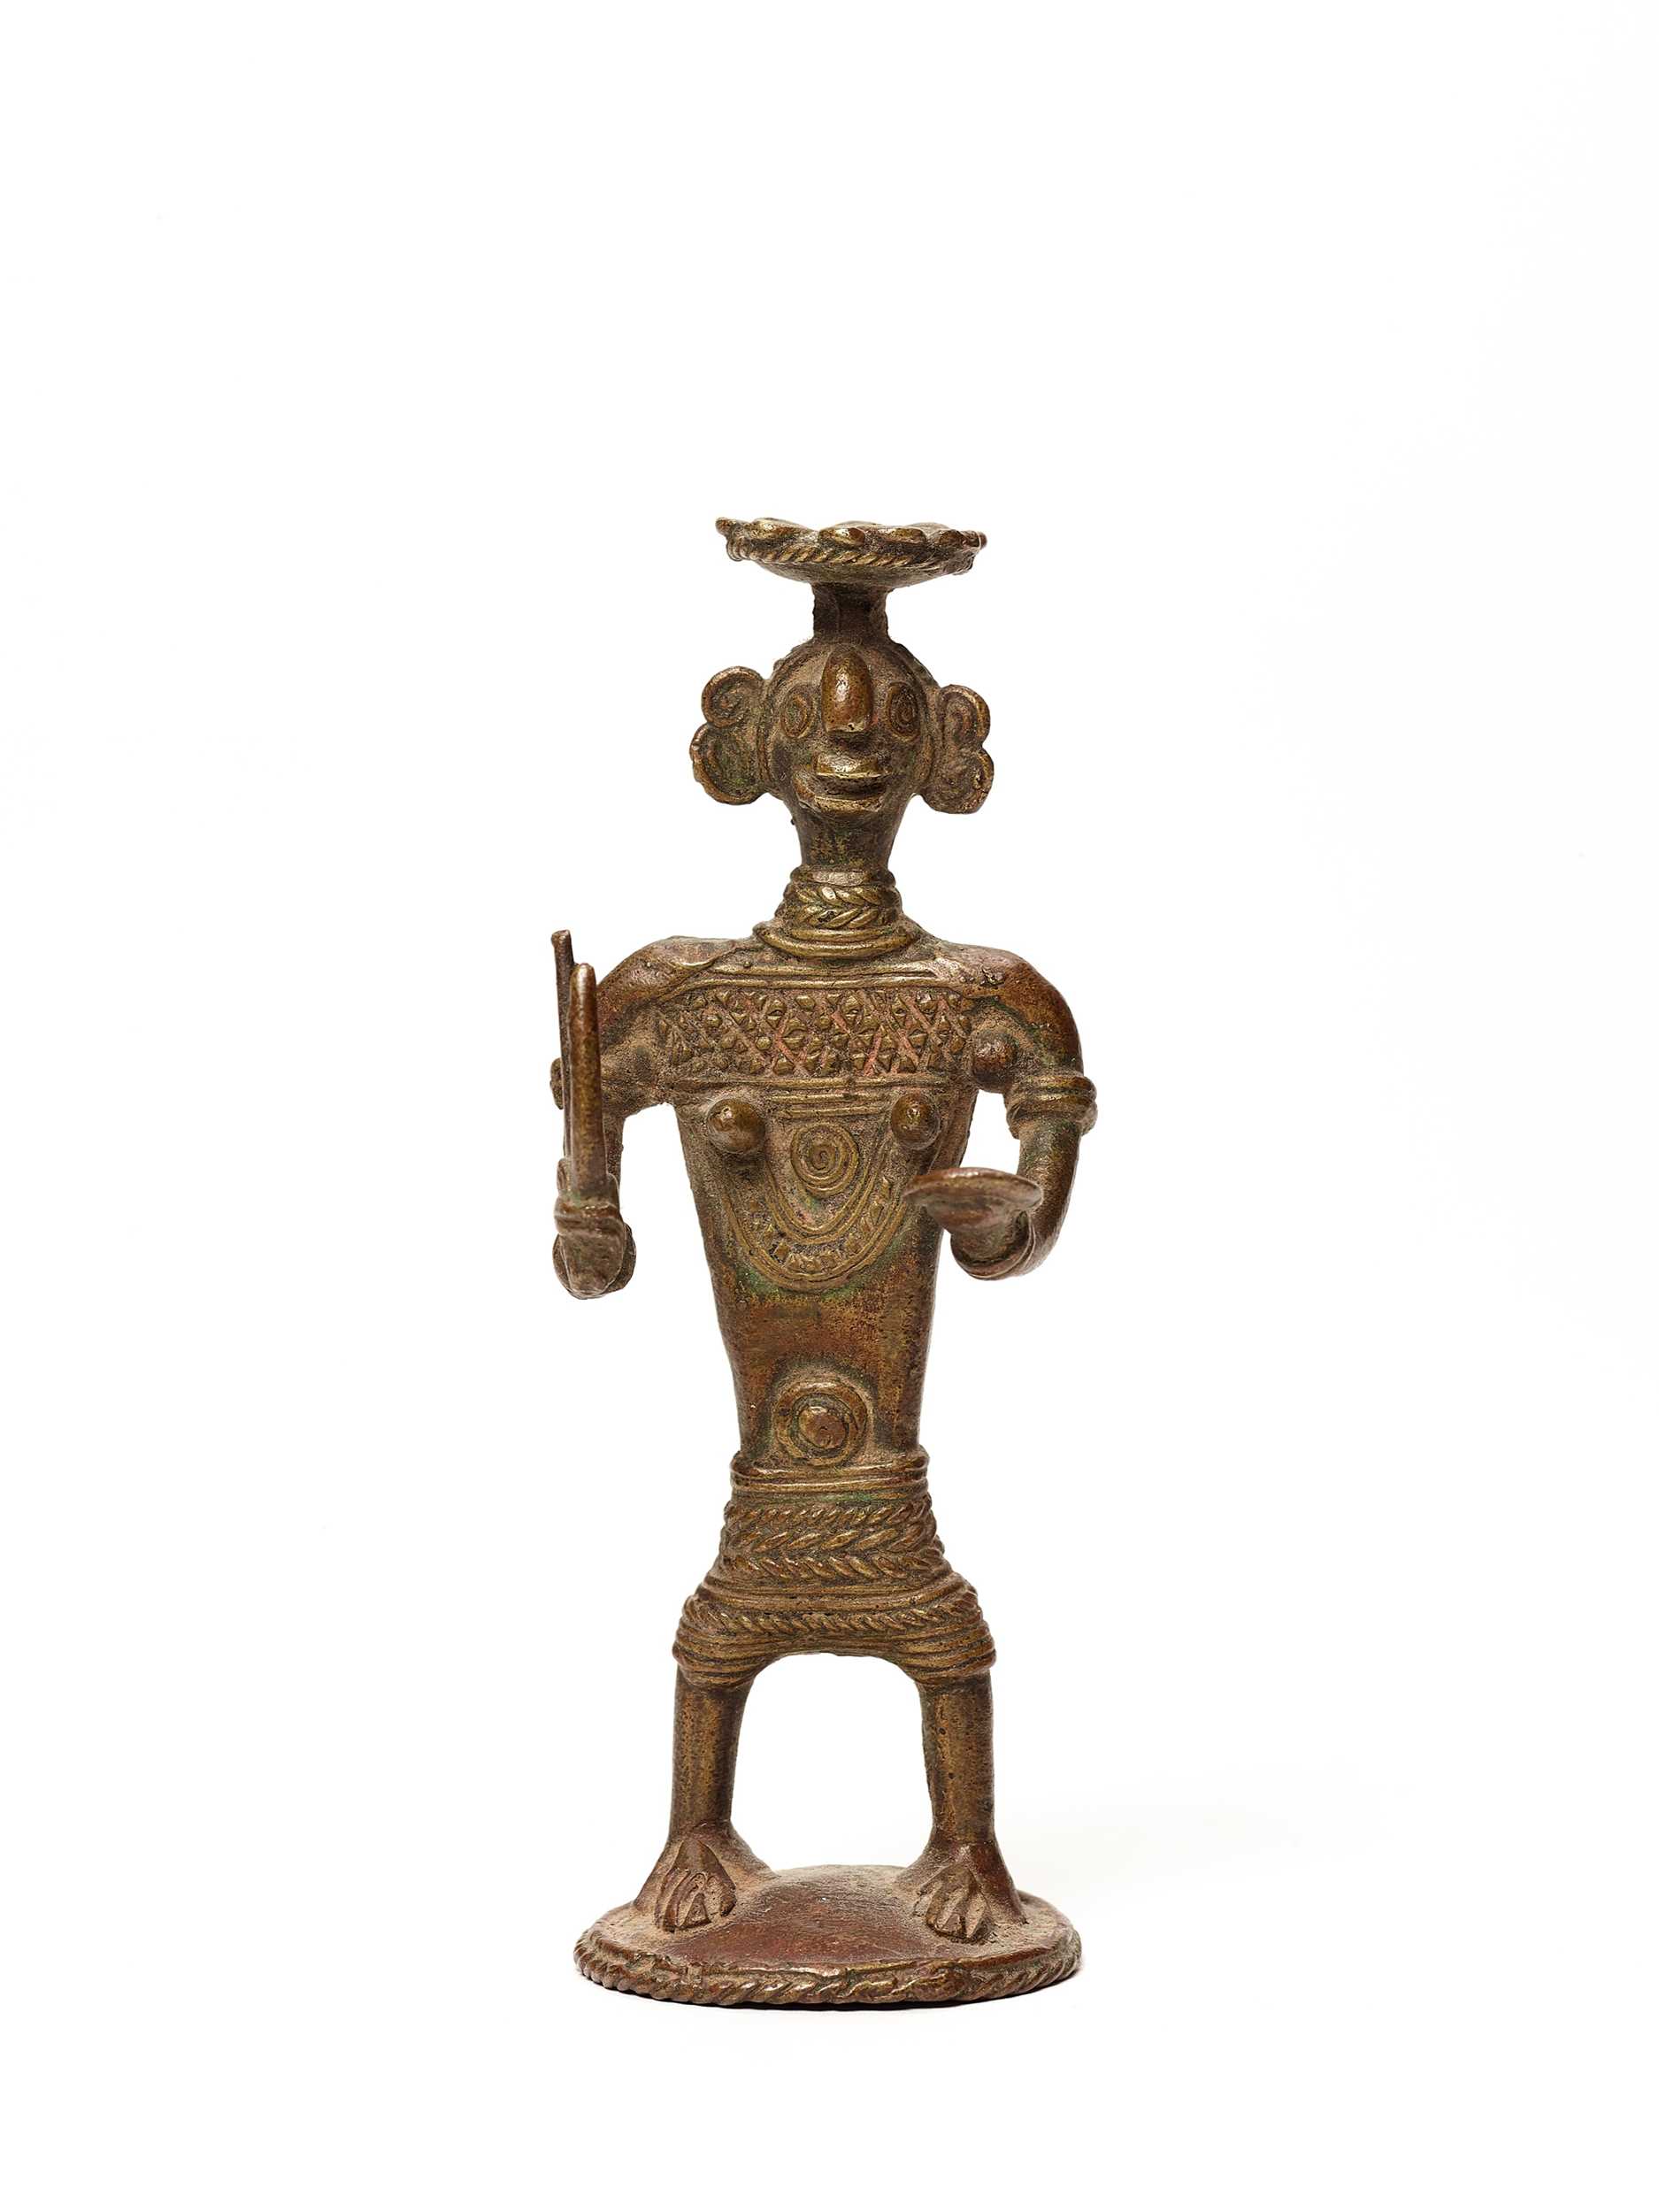 A BASTAR BRONZE OF A FEMALE DEITY WITH TRIDENT AND KHAPPAR